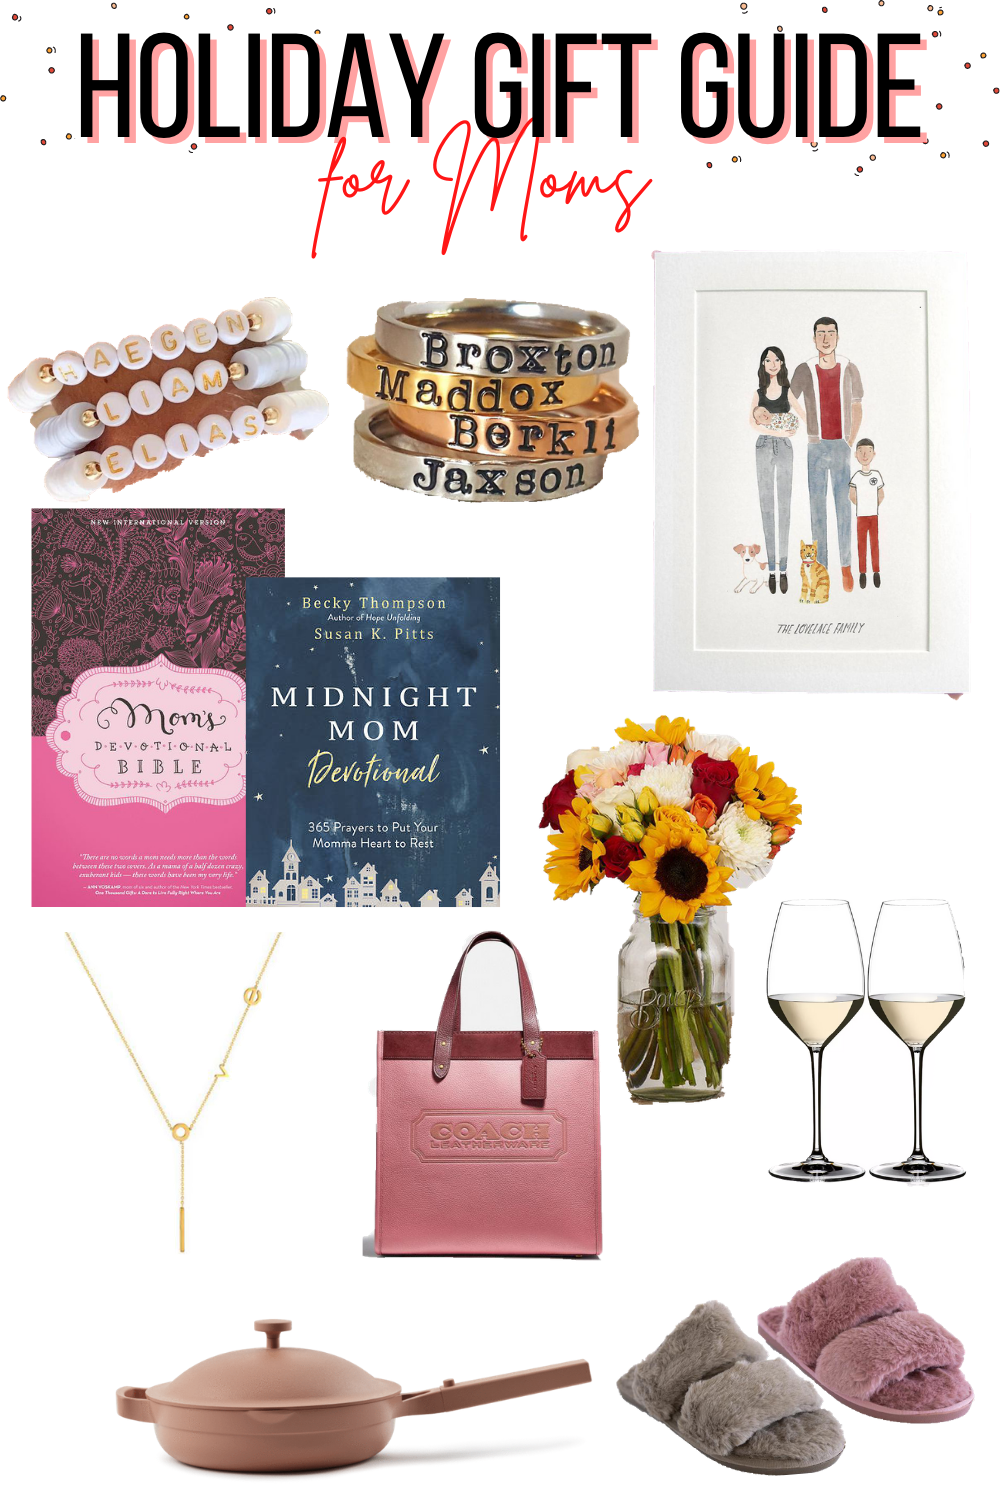 Holiday Gift Guide For Moms - Chelsea Nicole Love